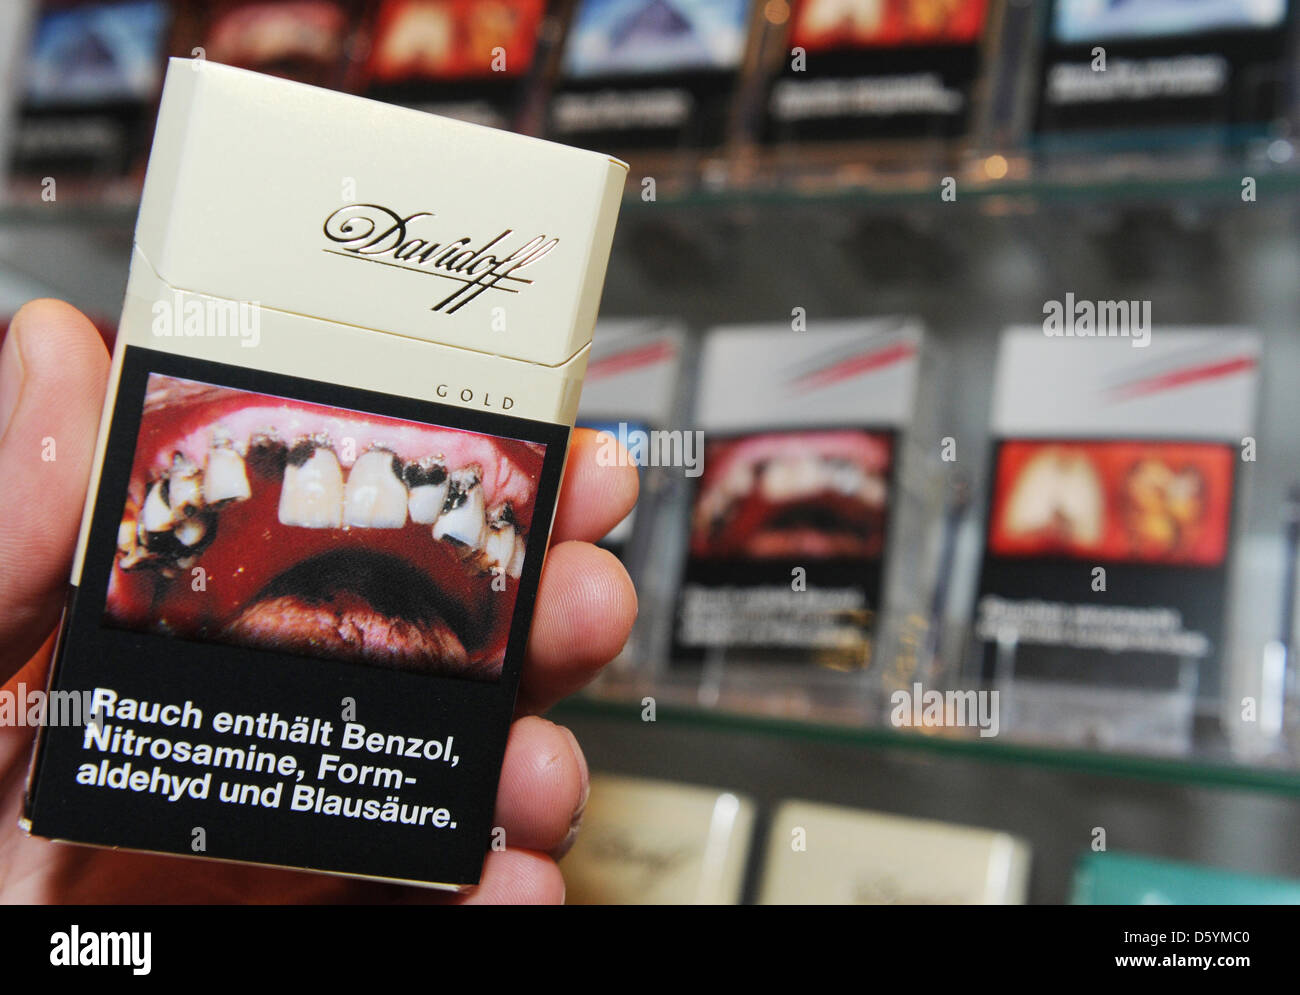 A hand holds a packet of cigarettes in front of Products of the tobacco and cigarette company Reemtsma which are illustrated with repulsive photos pictured during the company's financial statements press conference in Hamburg, Germany, 30 October 2012. Reemtsma wishes to call attention to the European Union directives which could lead to the expropriation of their brands and compan Stock Photo